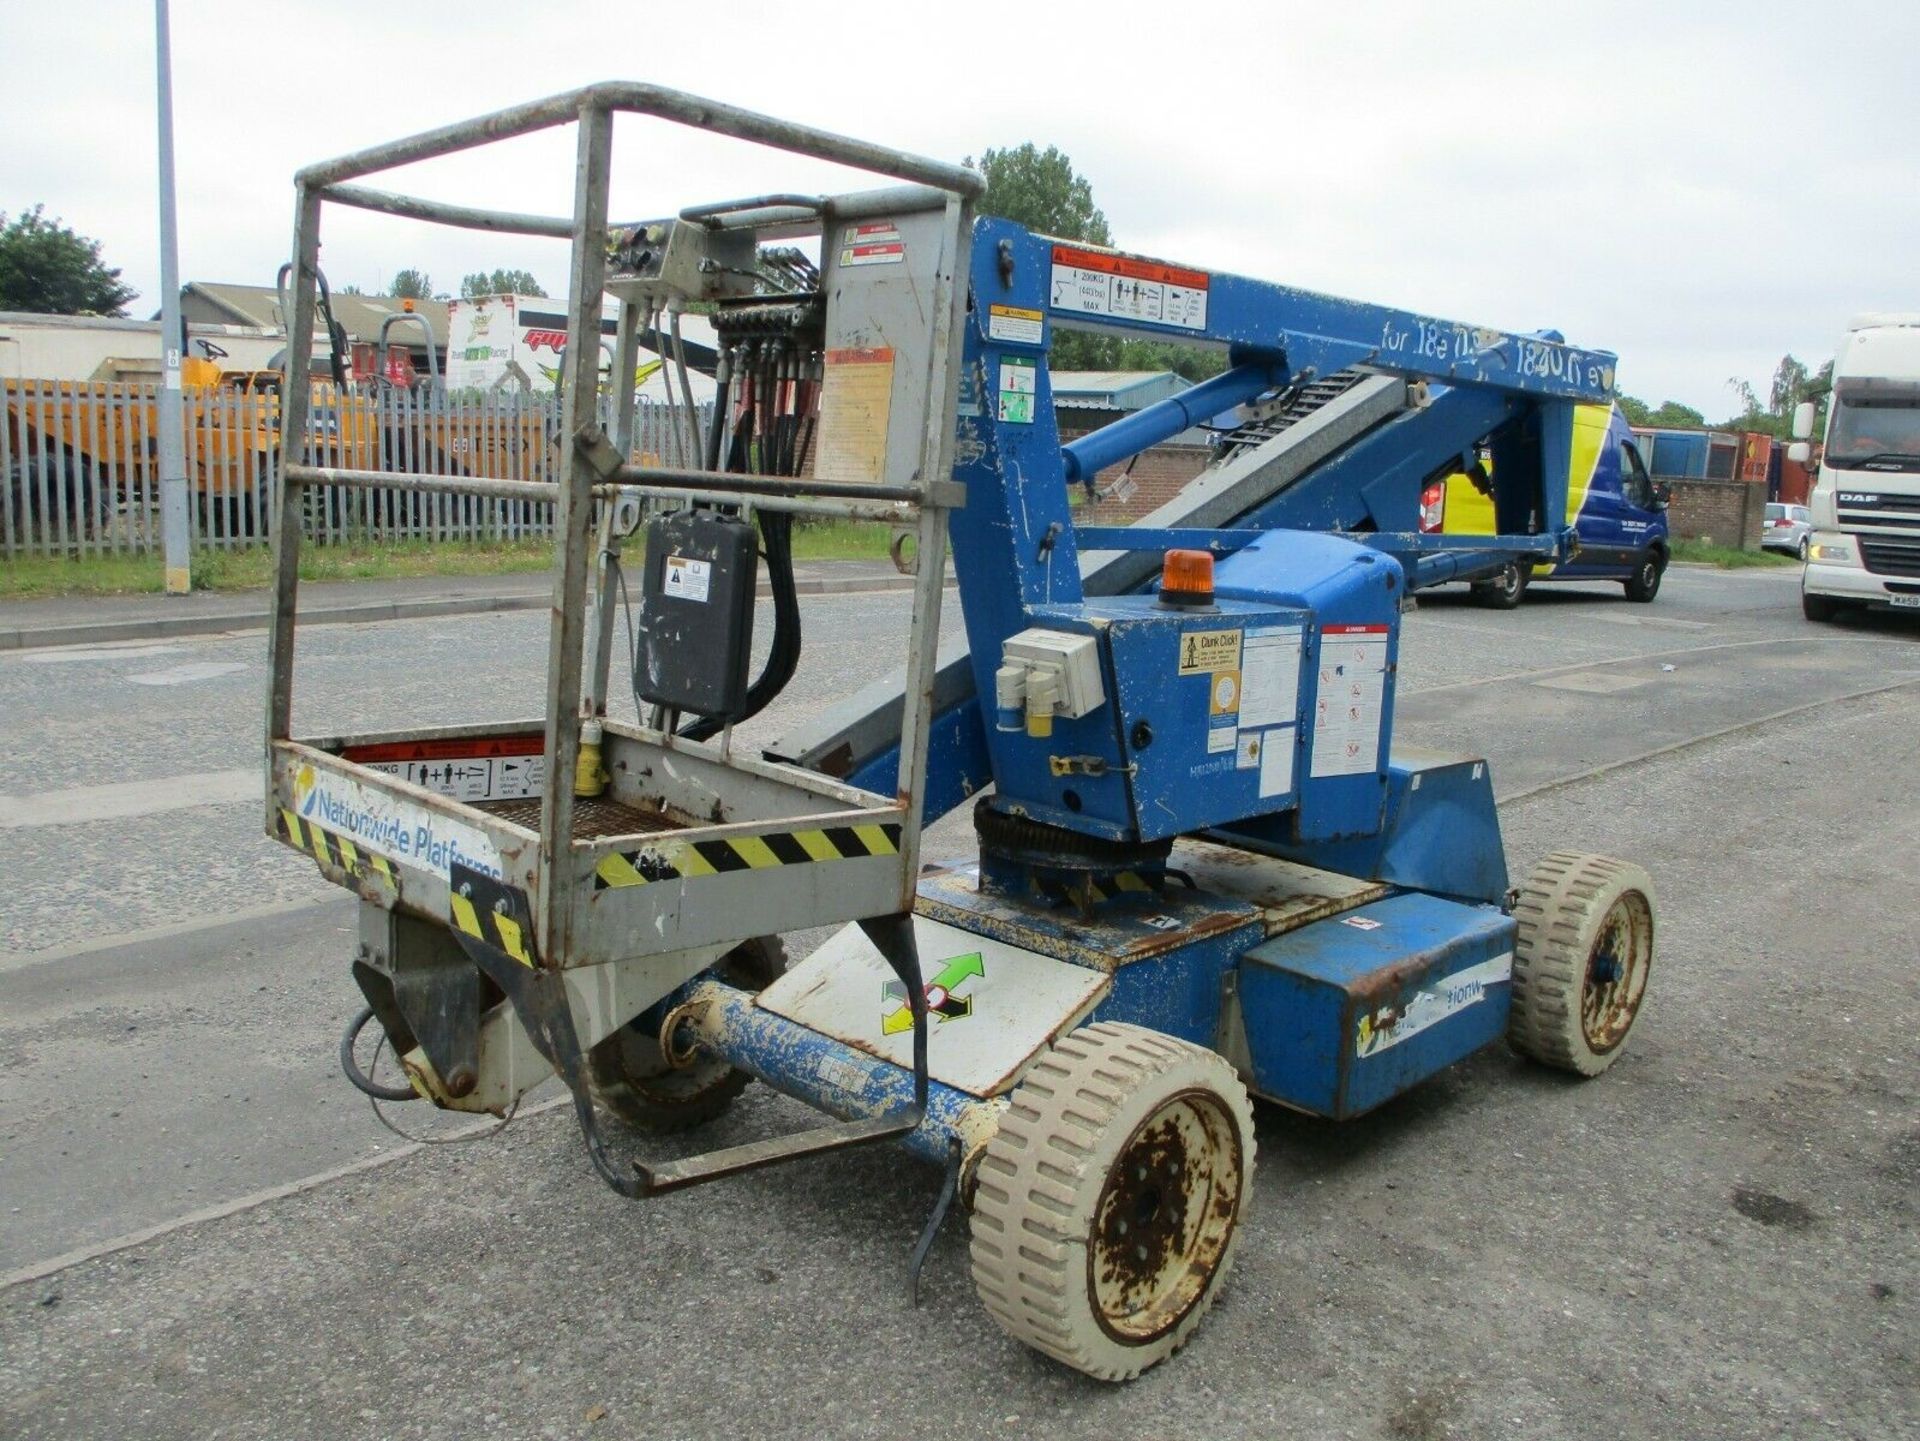 Nifty Lift HR12 Self Propelled Access Platform 2008 - Image 8 of 9